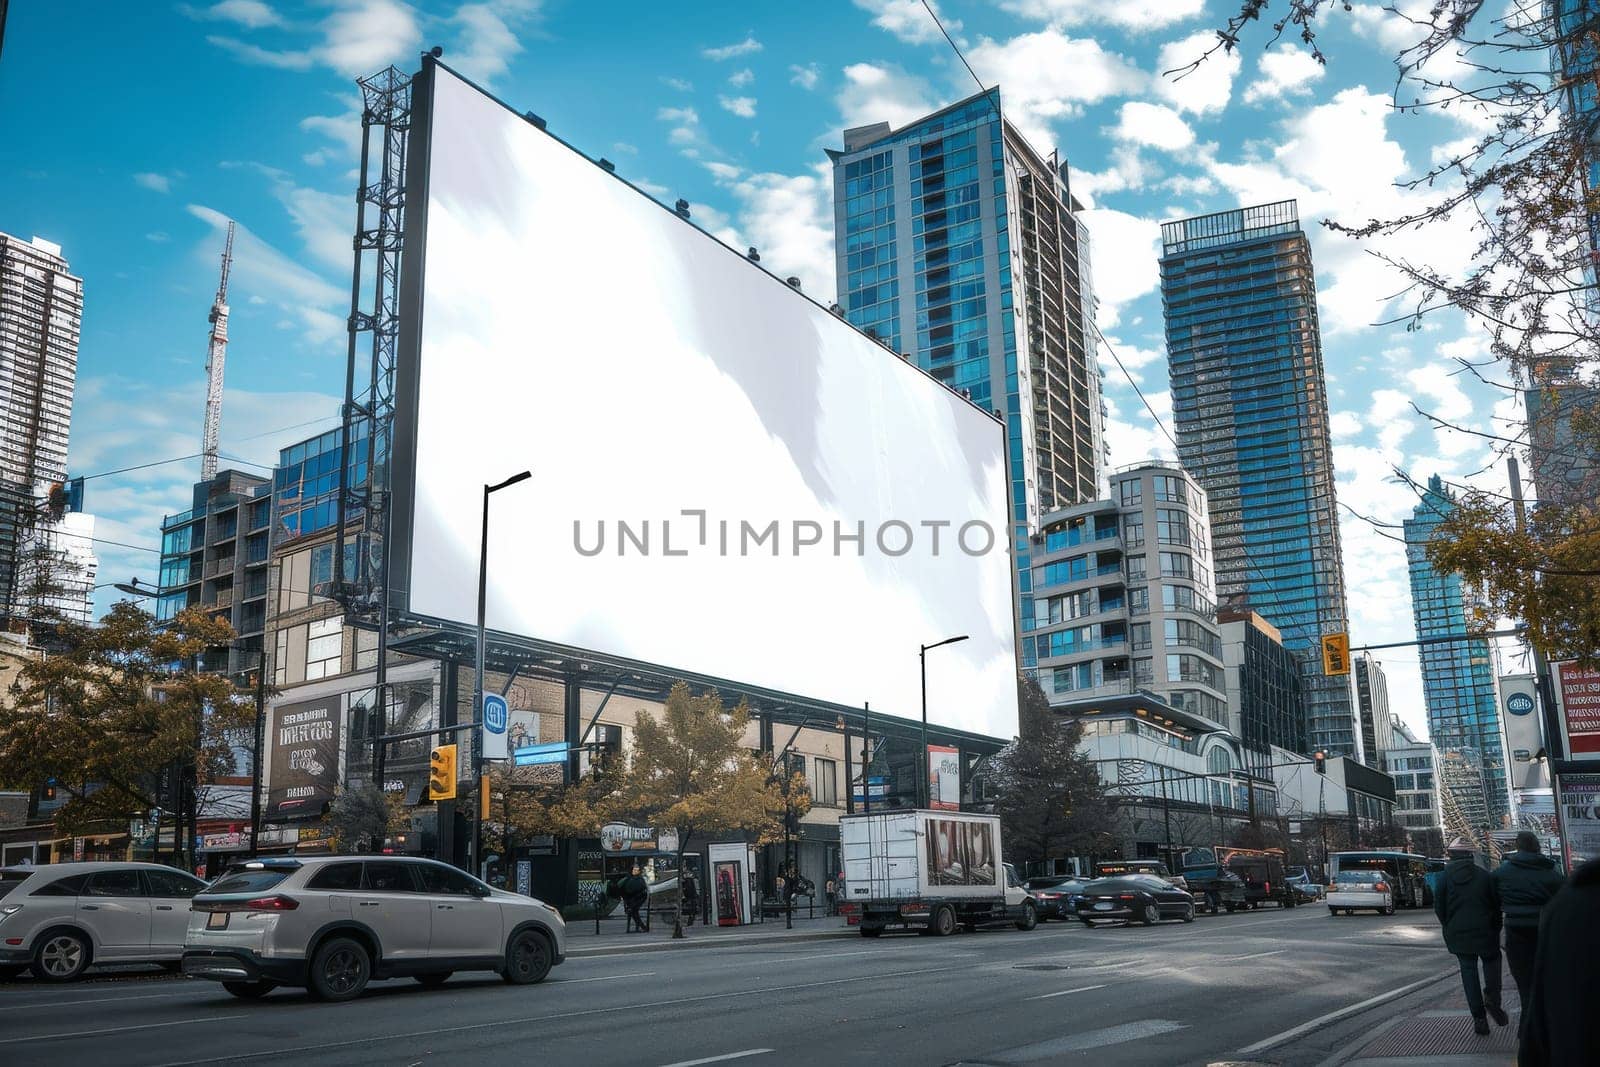 A large billboard is in the middle of a busy city street by itchaznong